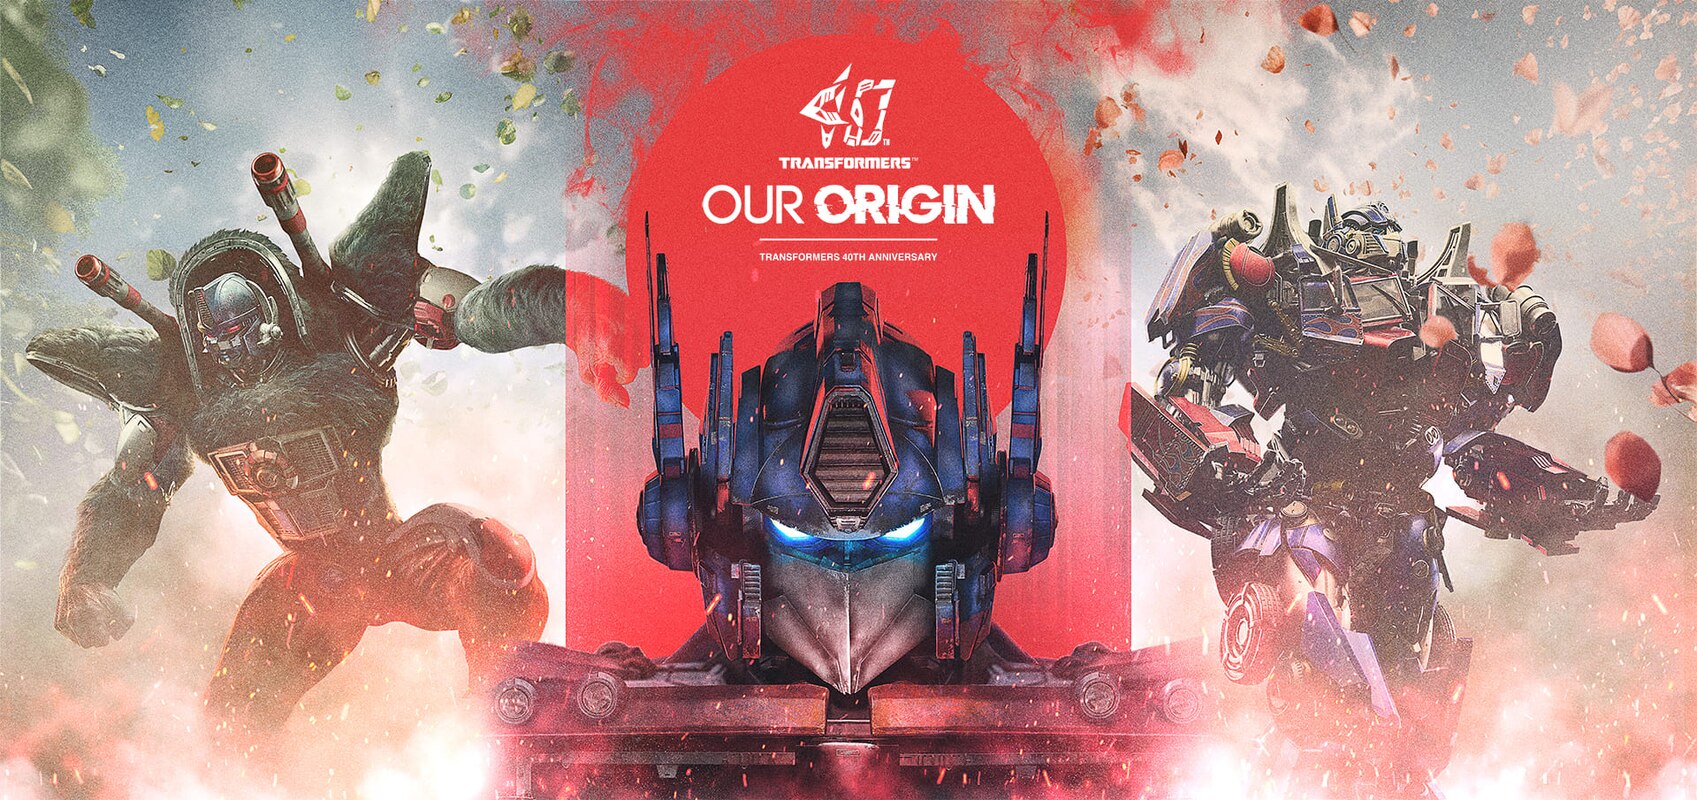 WATCH! Takara TOMY Transformers 40th Anniversary OUR ORIGIN Project Teaser